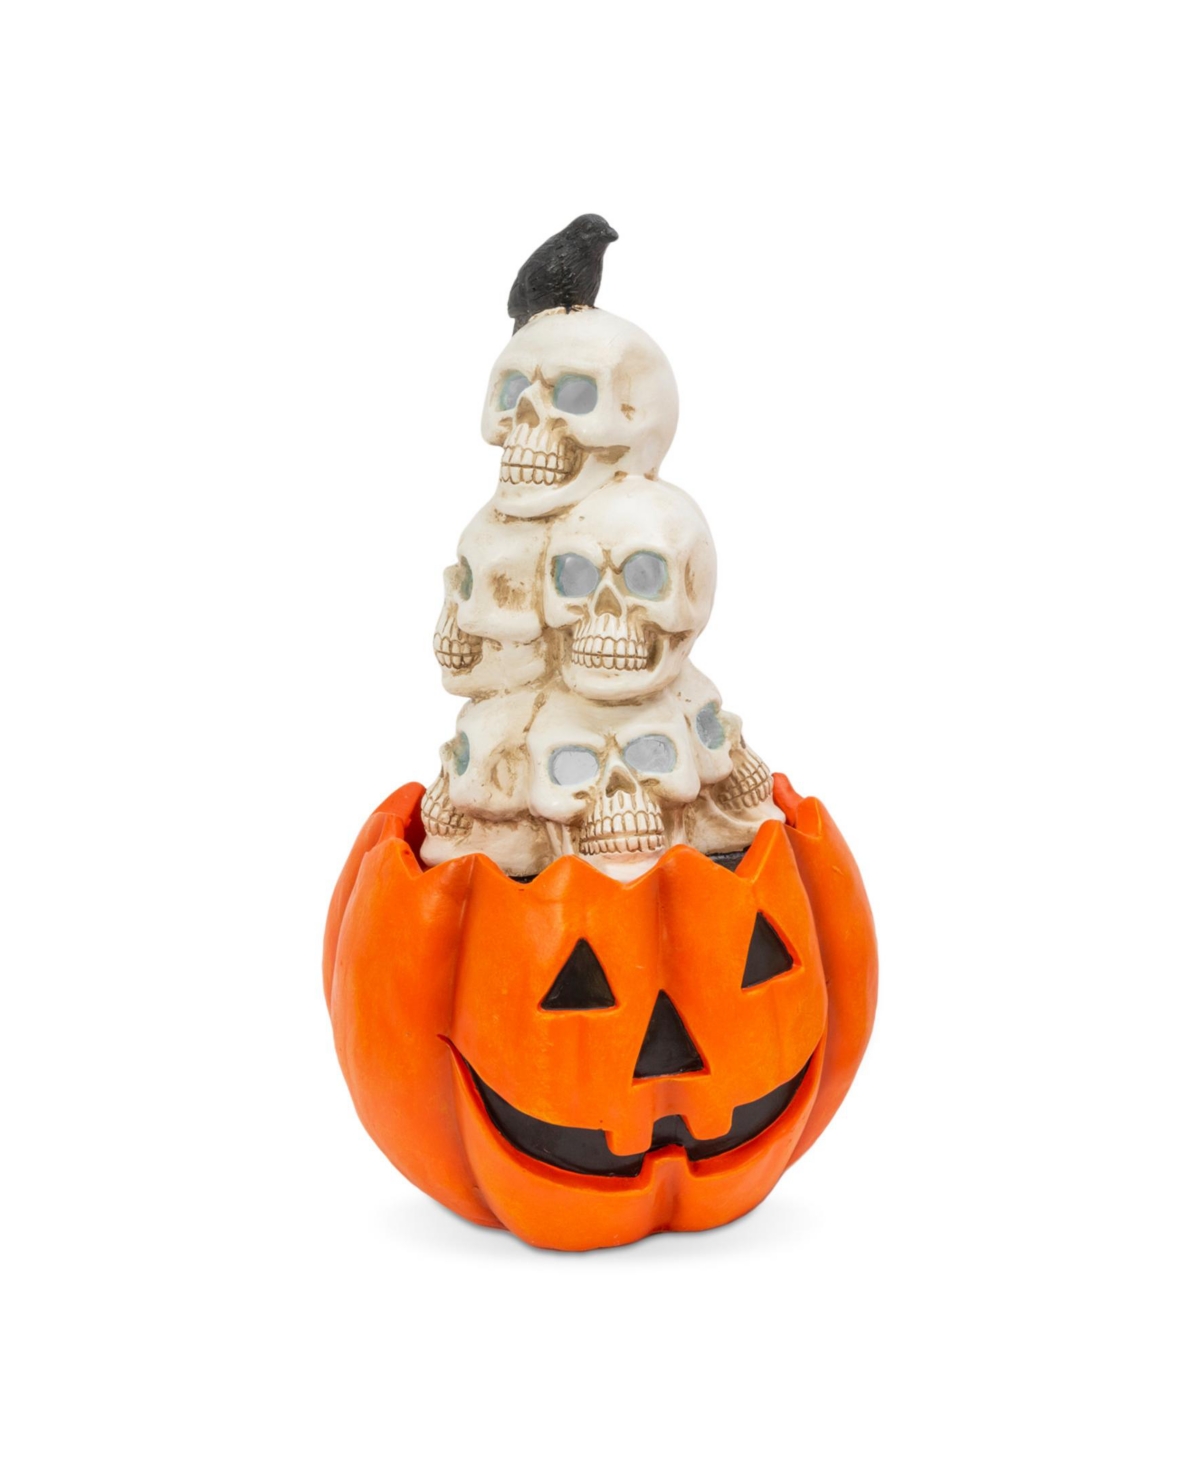 23" H Electric Lighted Magnesium Smoking Pumpkin with Skulls Stacked on Top - Multicolor